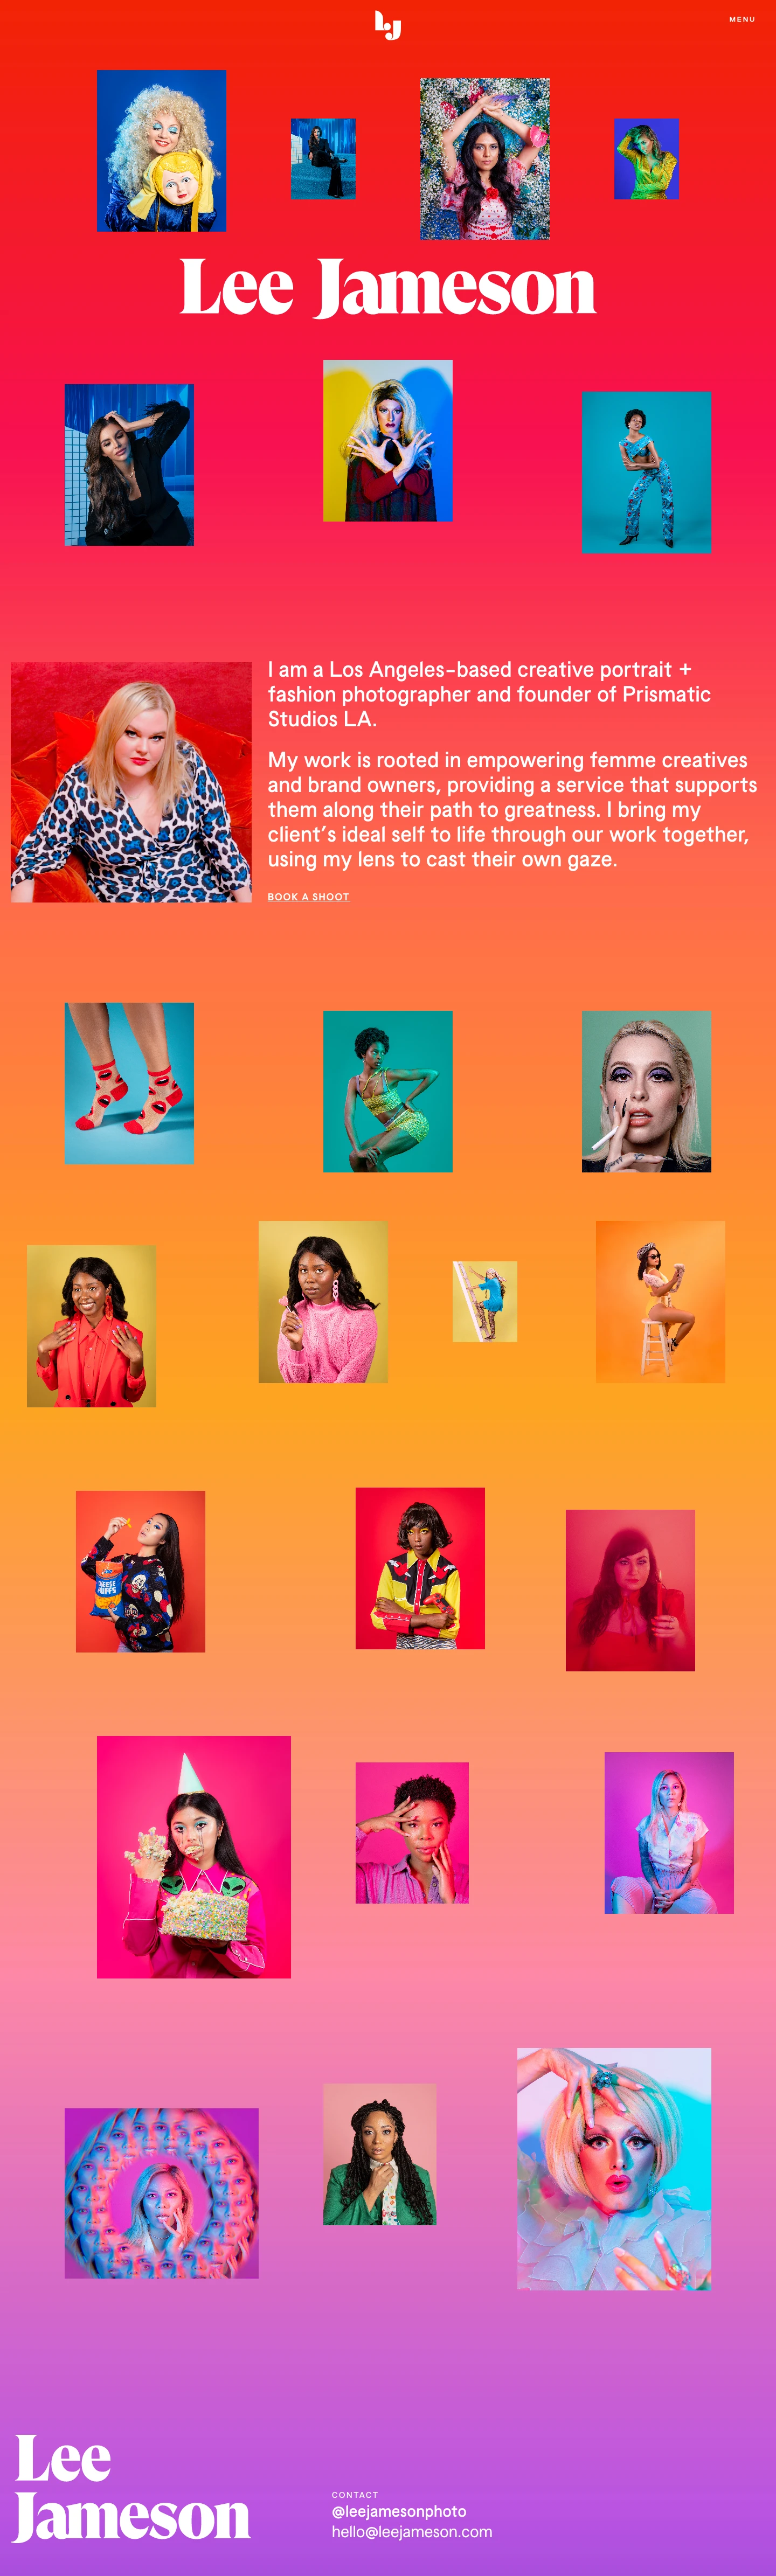 Lee Jameson Landing Page Example: Lee Jameson is a Los Angeles-based creative portrait + fashion photographer and founder of Prismatic Studios LA. Her work primarily focuses on highlighting intersectional feminist subjects and spaces in Los Angeles.